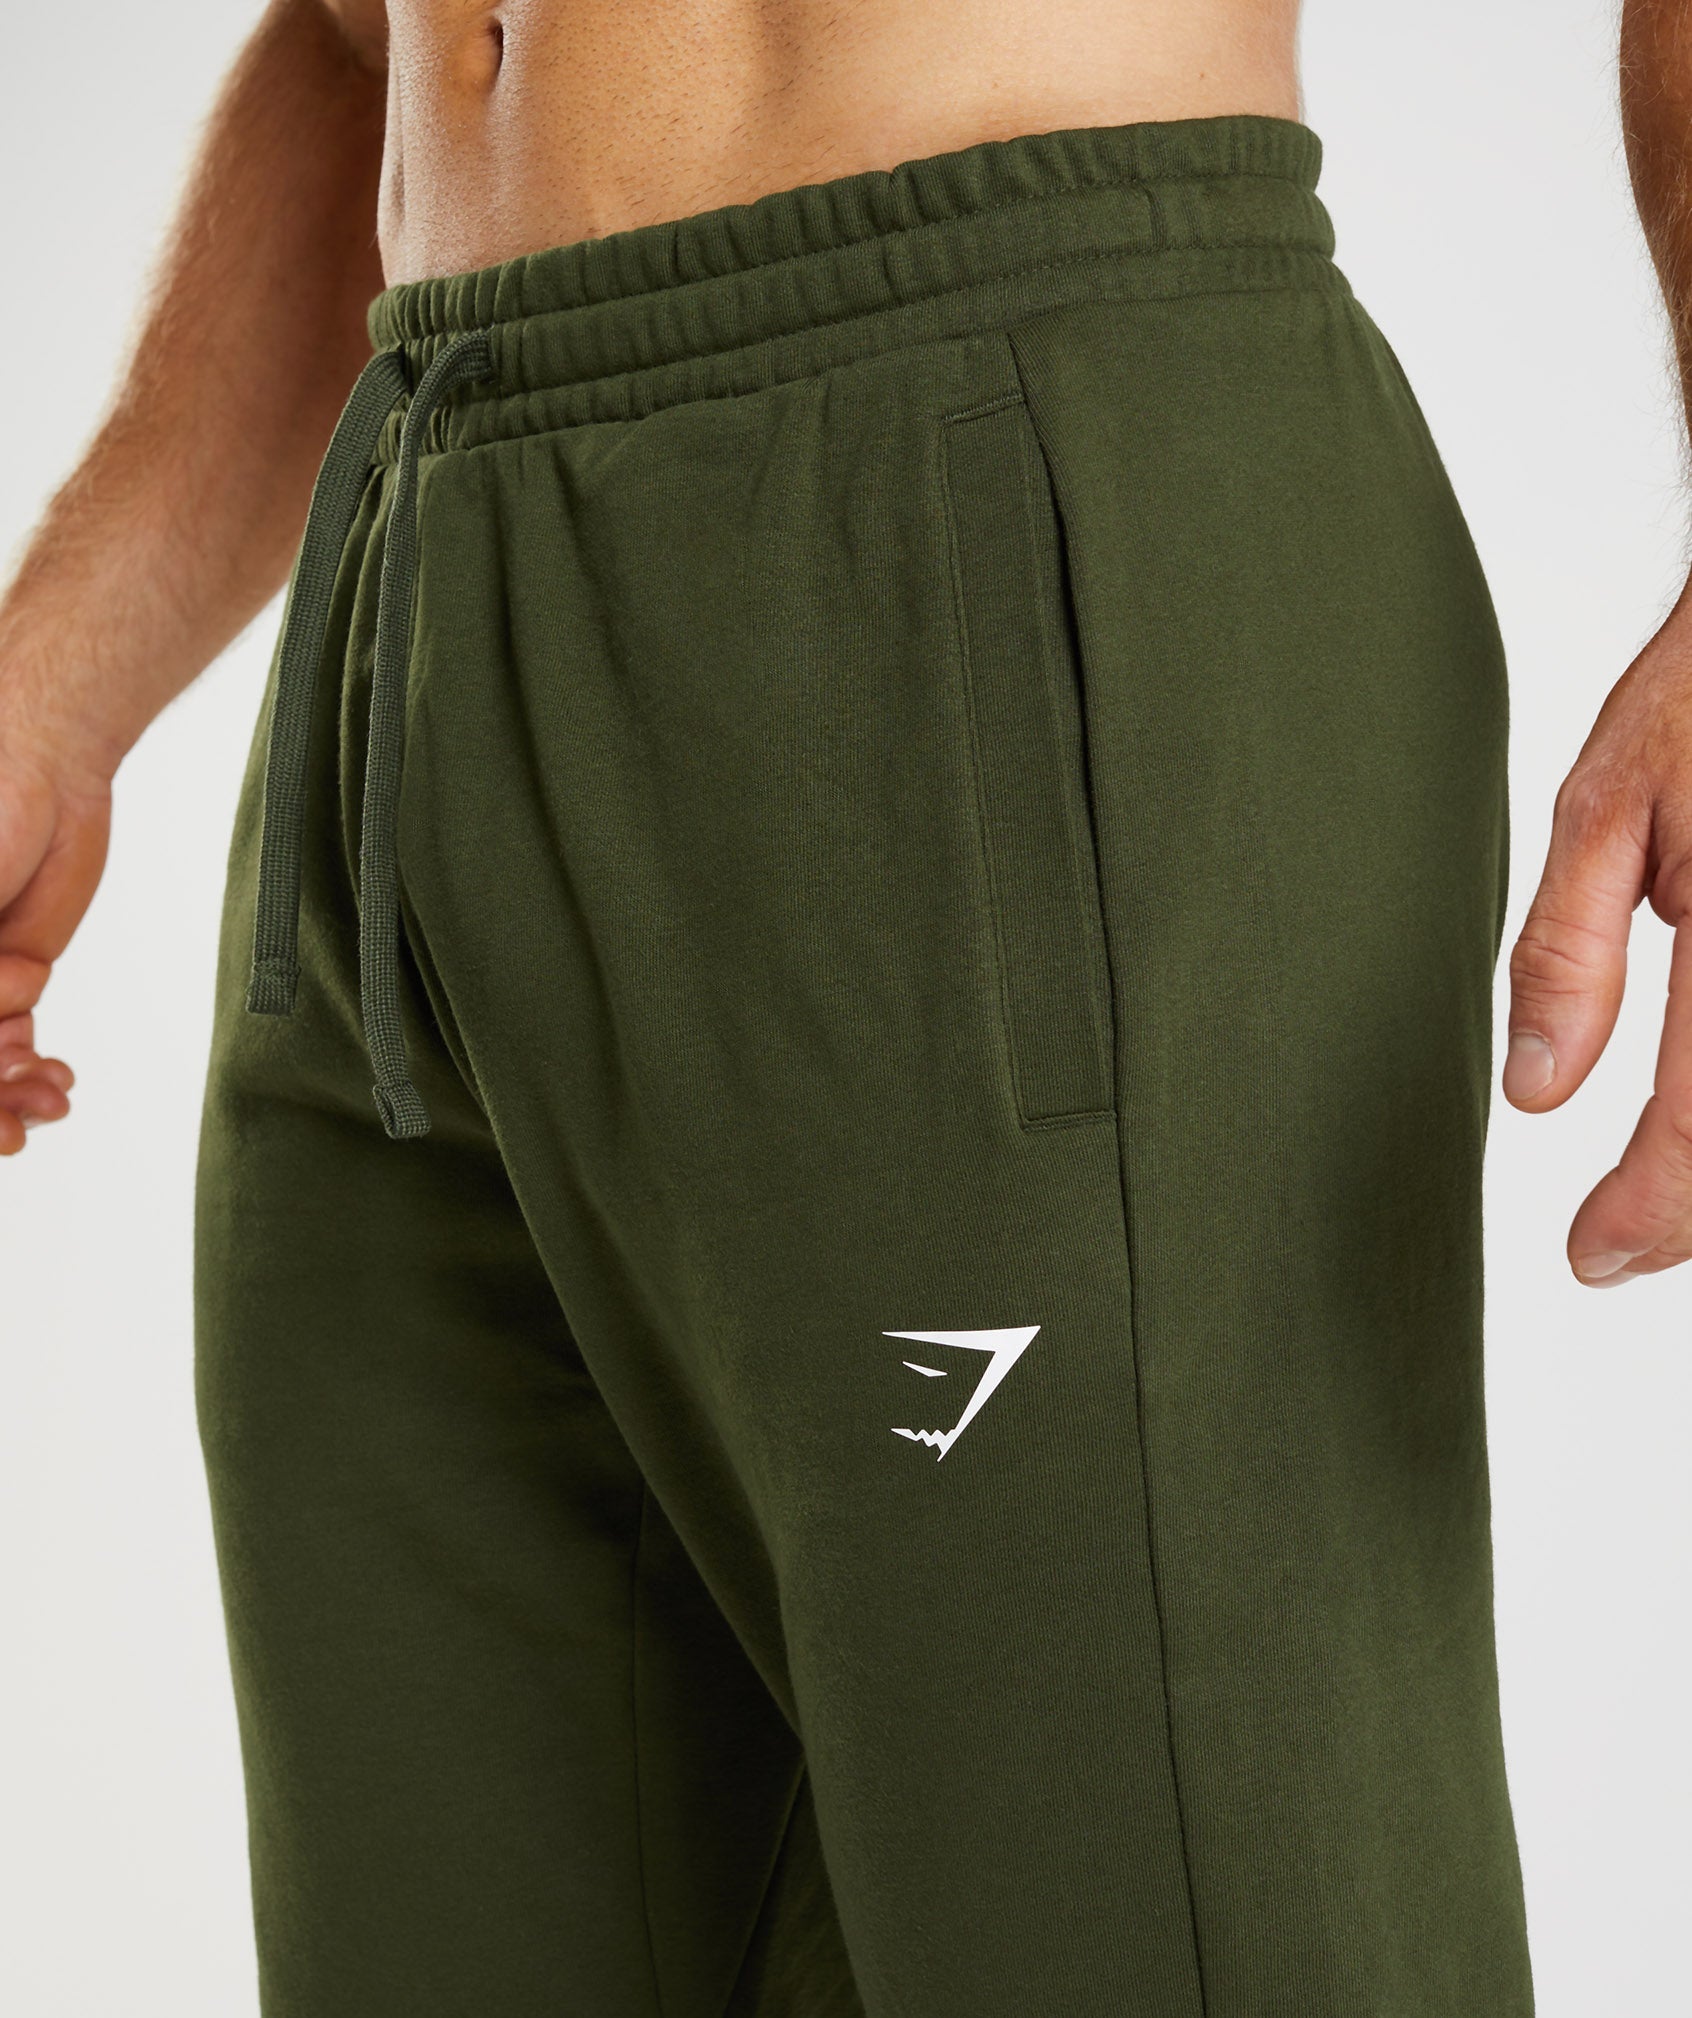 Gymshark on X: Missed out on the Oversized Joggers and Super